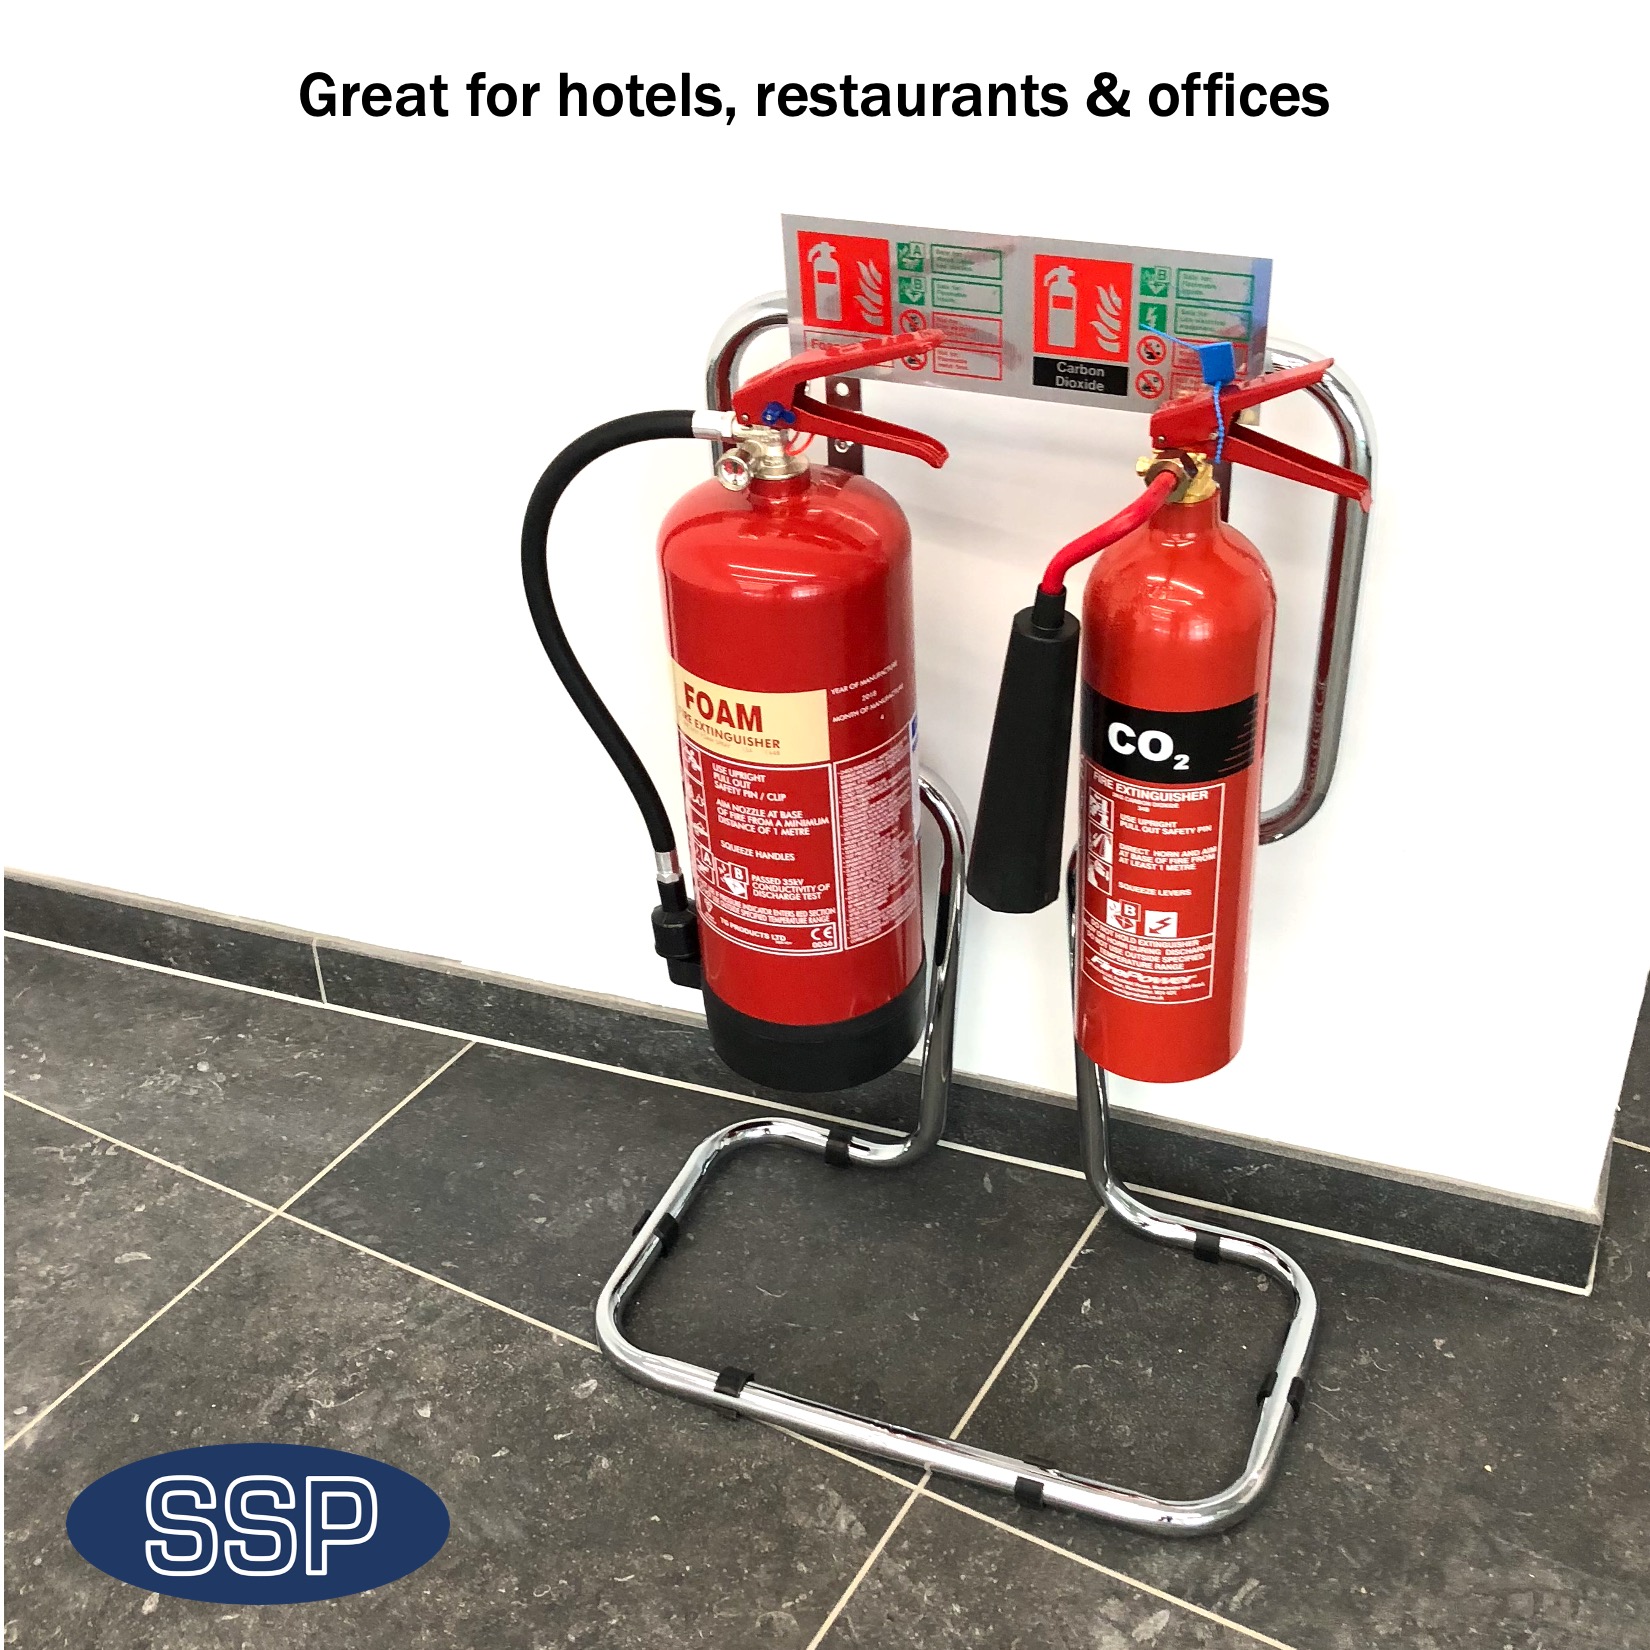 Chrome CO2 and From Extinguishers on Chrome Stand with Signs